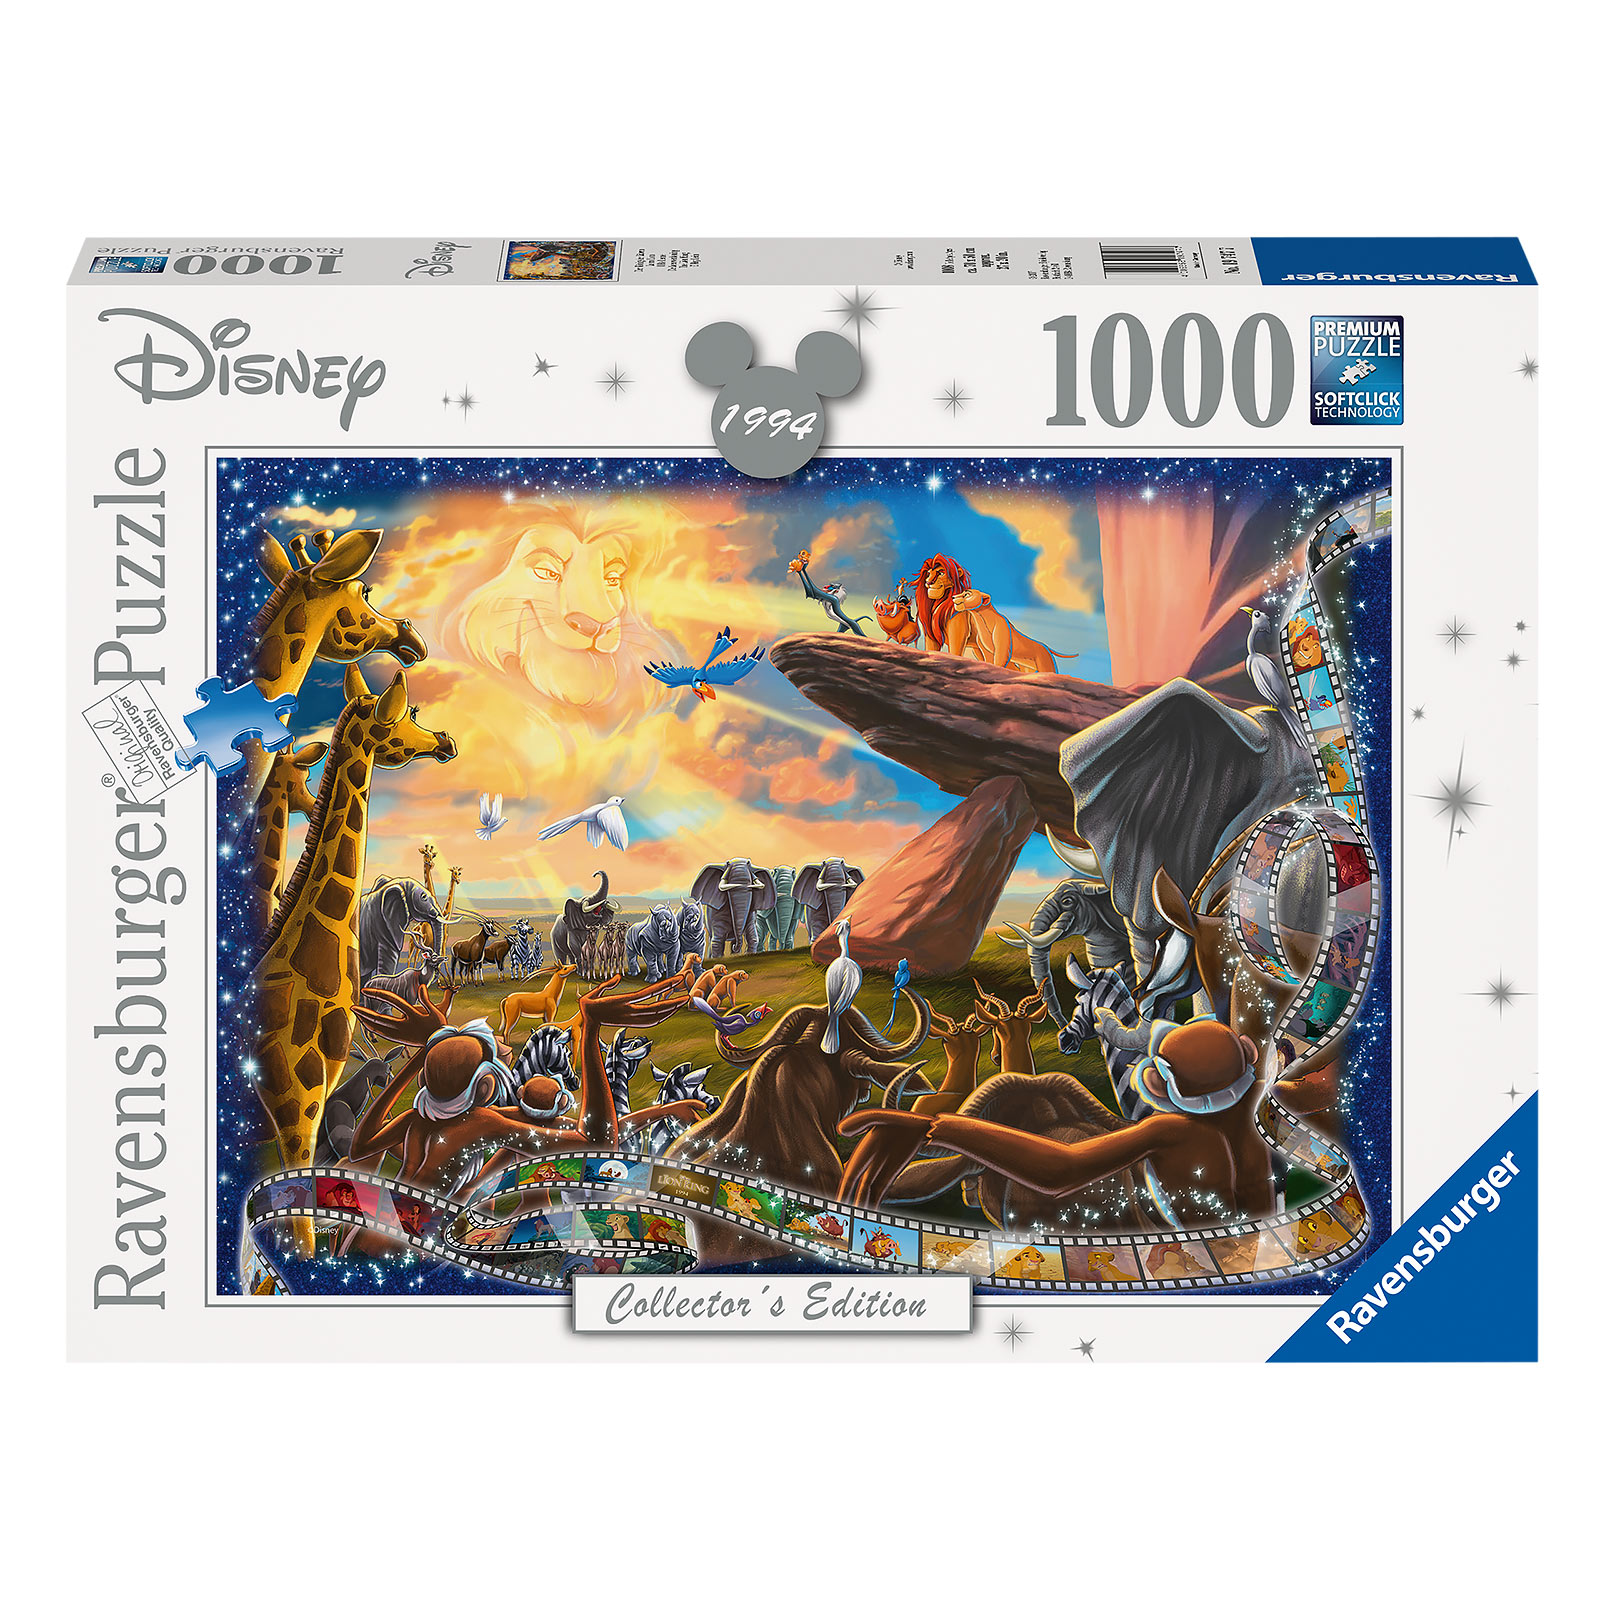 Lion King - Circle of Life Puzzle